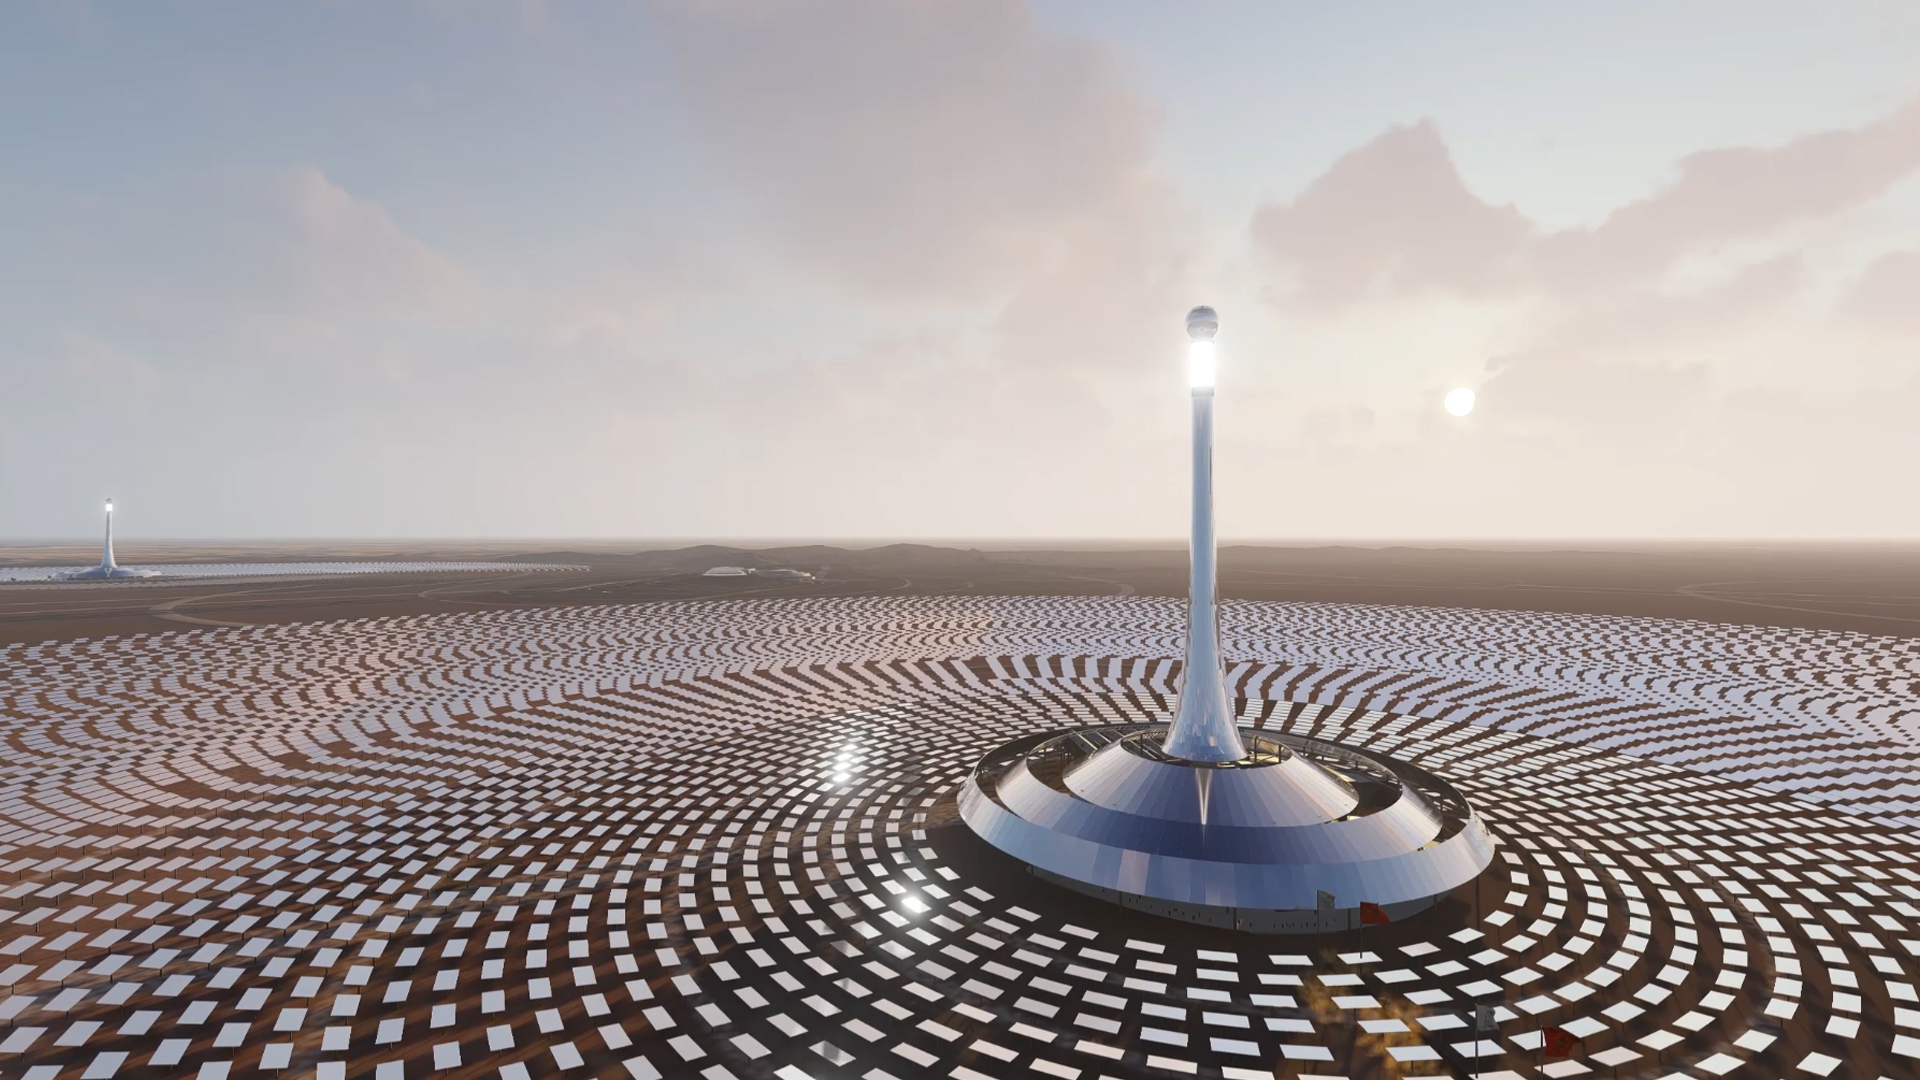 AMBS ::
Hybrid concentrated solar power of 800 MW designed to create a ripple effect